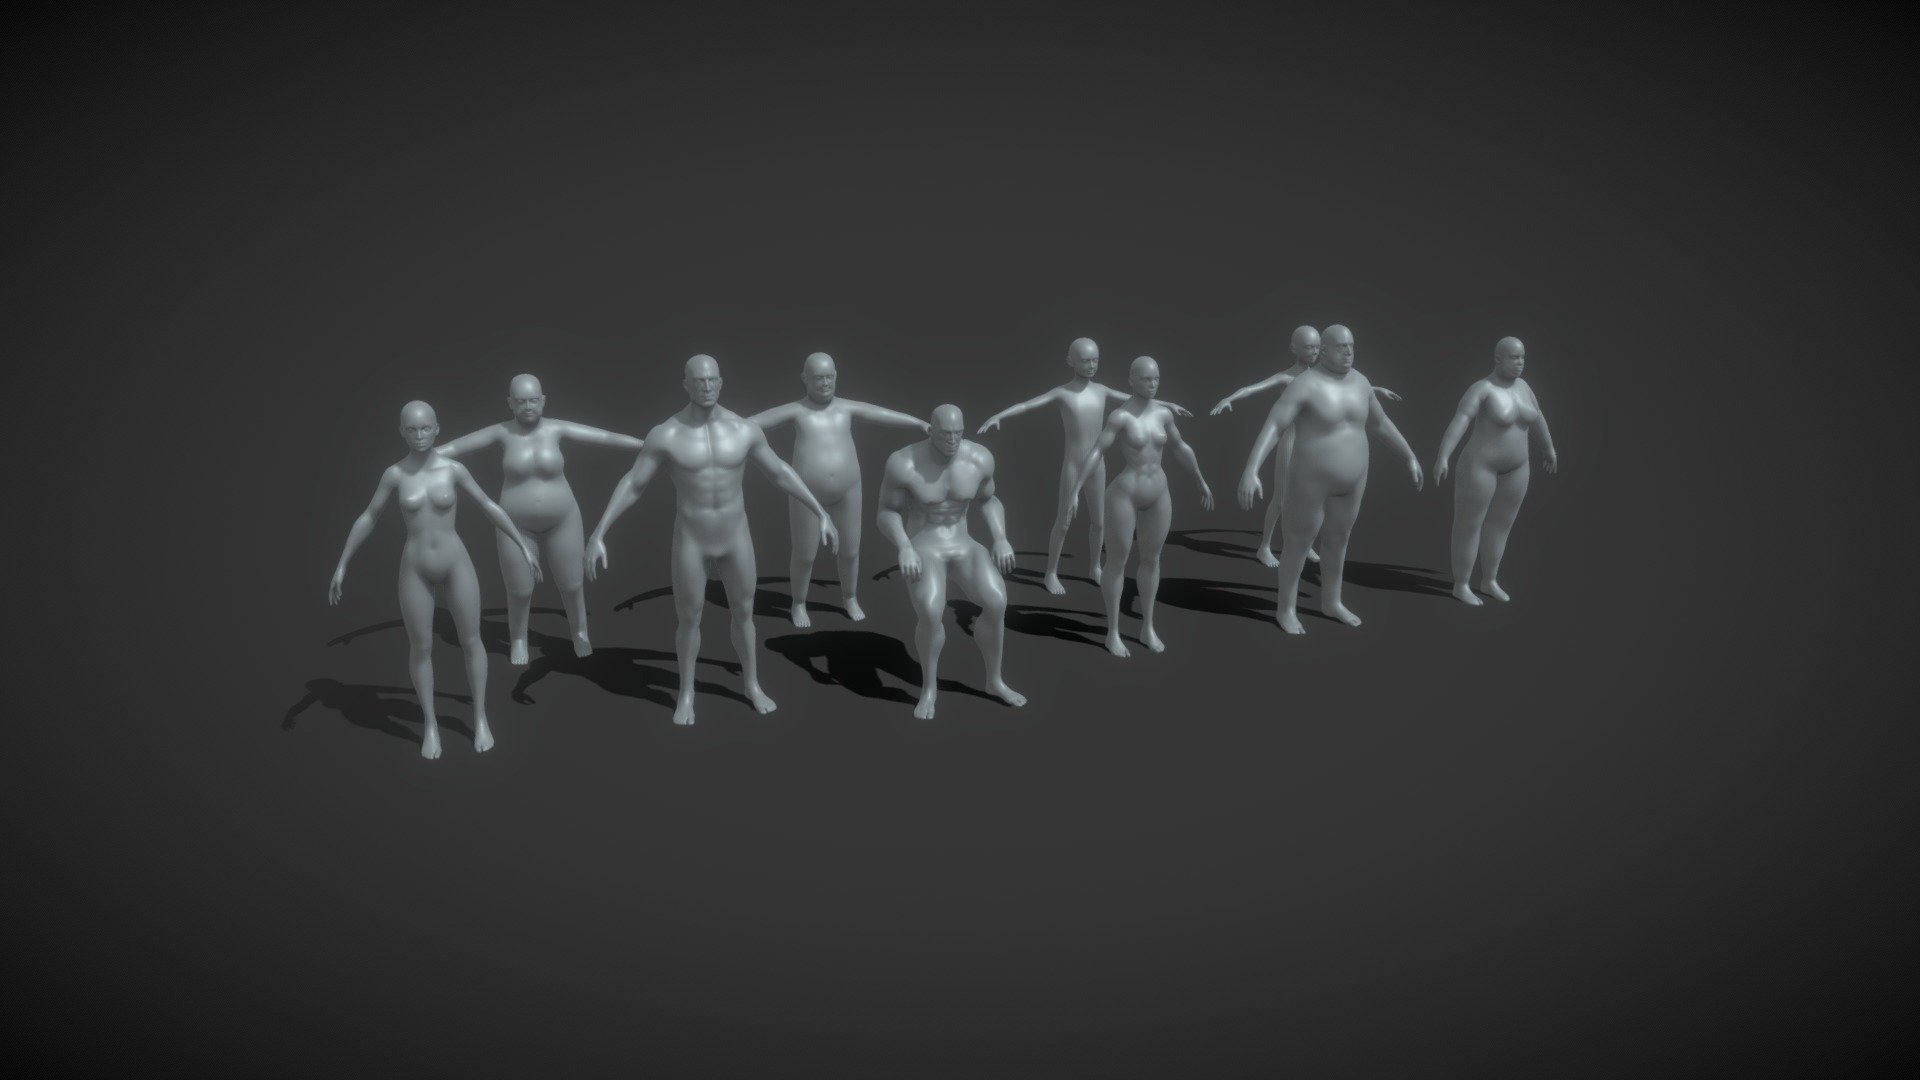 Human Body Base Mesh Animated &amp; Rigged 20k Poly 10 3D Models Pack consists of 10 models:  


Male Body (20,026 P, 19,611 V)
Female Body (20,486 P, 20,258 V)
Boy Kid Body (20,842 P, 19,759 V)
Girl Kid Body (20,820 P, 19,739 V)
Male Body Fat (20,168 P, 19,954 V)
Female Body Fat (20,015 P, 19,678 V)
Fat Boy Kid Body (20,842 P, 19,759 V)
Fat Girl Kid Body (19,804 P, 20,908 V)
Strong Muscular (18,253 P, 18,040 V)
Strong Muscular (20,158 P, 20,786 V)

Good topology ready for animation.  

Technical details:  


File formats included are: FBX, OBJ, GLB, PLY, STL, ABC, DAE, BLEND
Native software file format: BLEND
All models are rigged and animated.
6 animations are included: idle, walk, run, squat, push-up, sit down &amp; get up. All animations are full cycles.
Only following formats contain rig and animation: BLEND, FBX, GLTF/GLB
You can buy any of them as a single model, or save 51% if you buy this pack.
 - Human Body Base Mesh Animated Rigged 20k Poly - Buy Royalty Free 3D model by 3DDisco 3d model